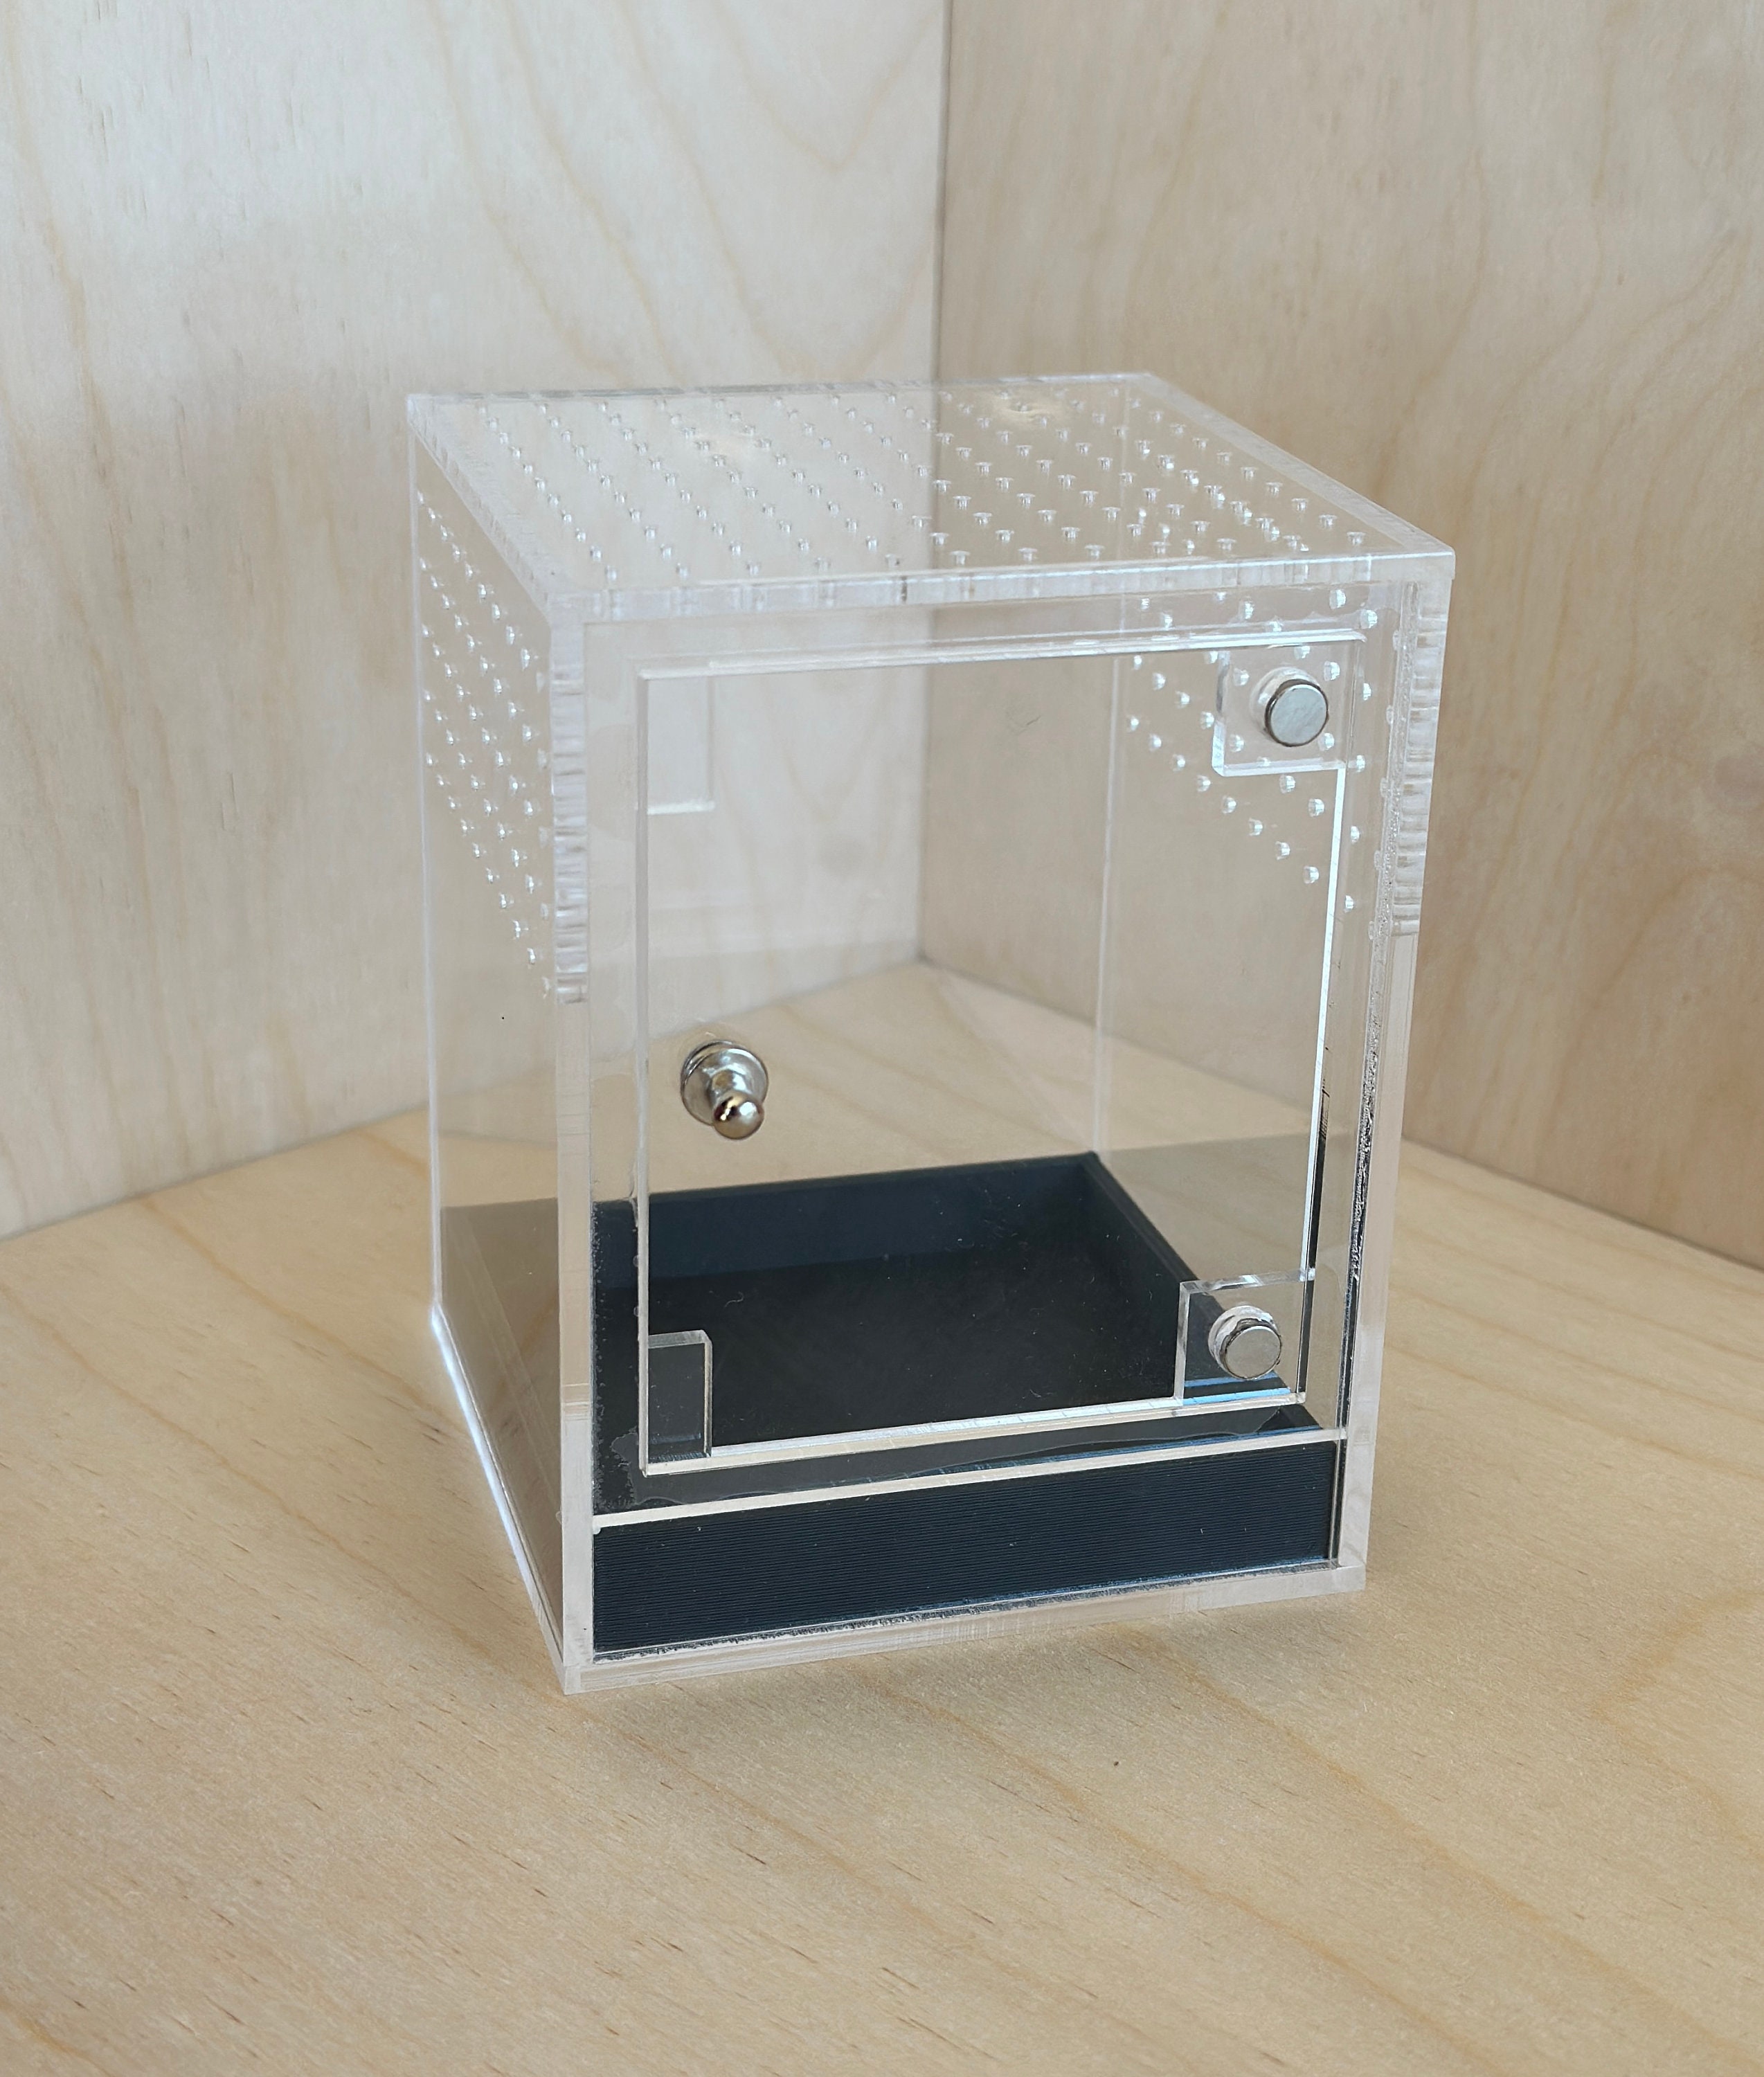 Made-to-order Wizard's Study Jumping Spider Enclosure,jumping